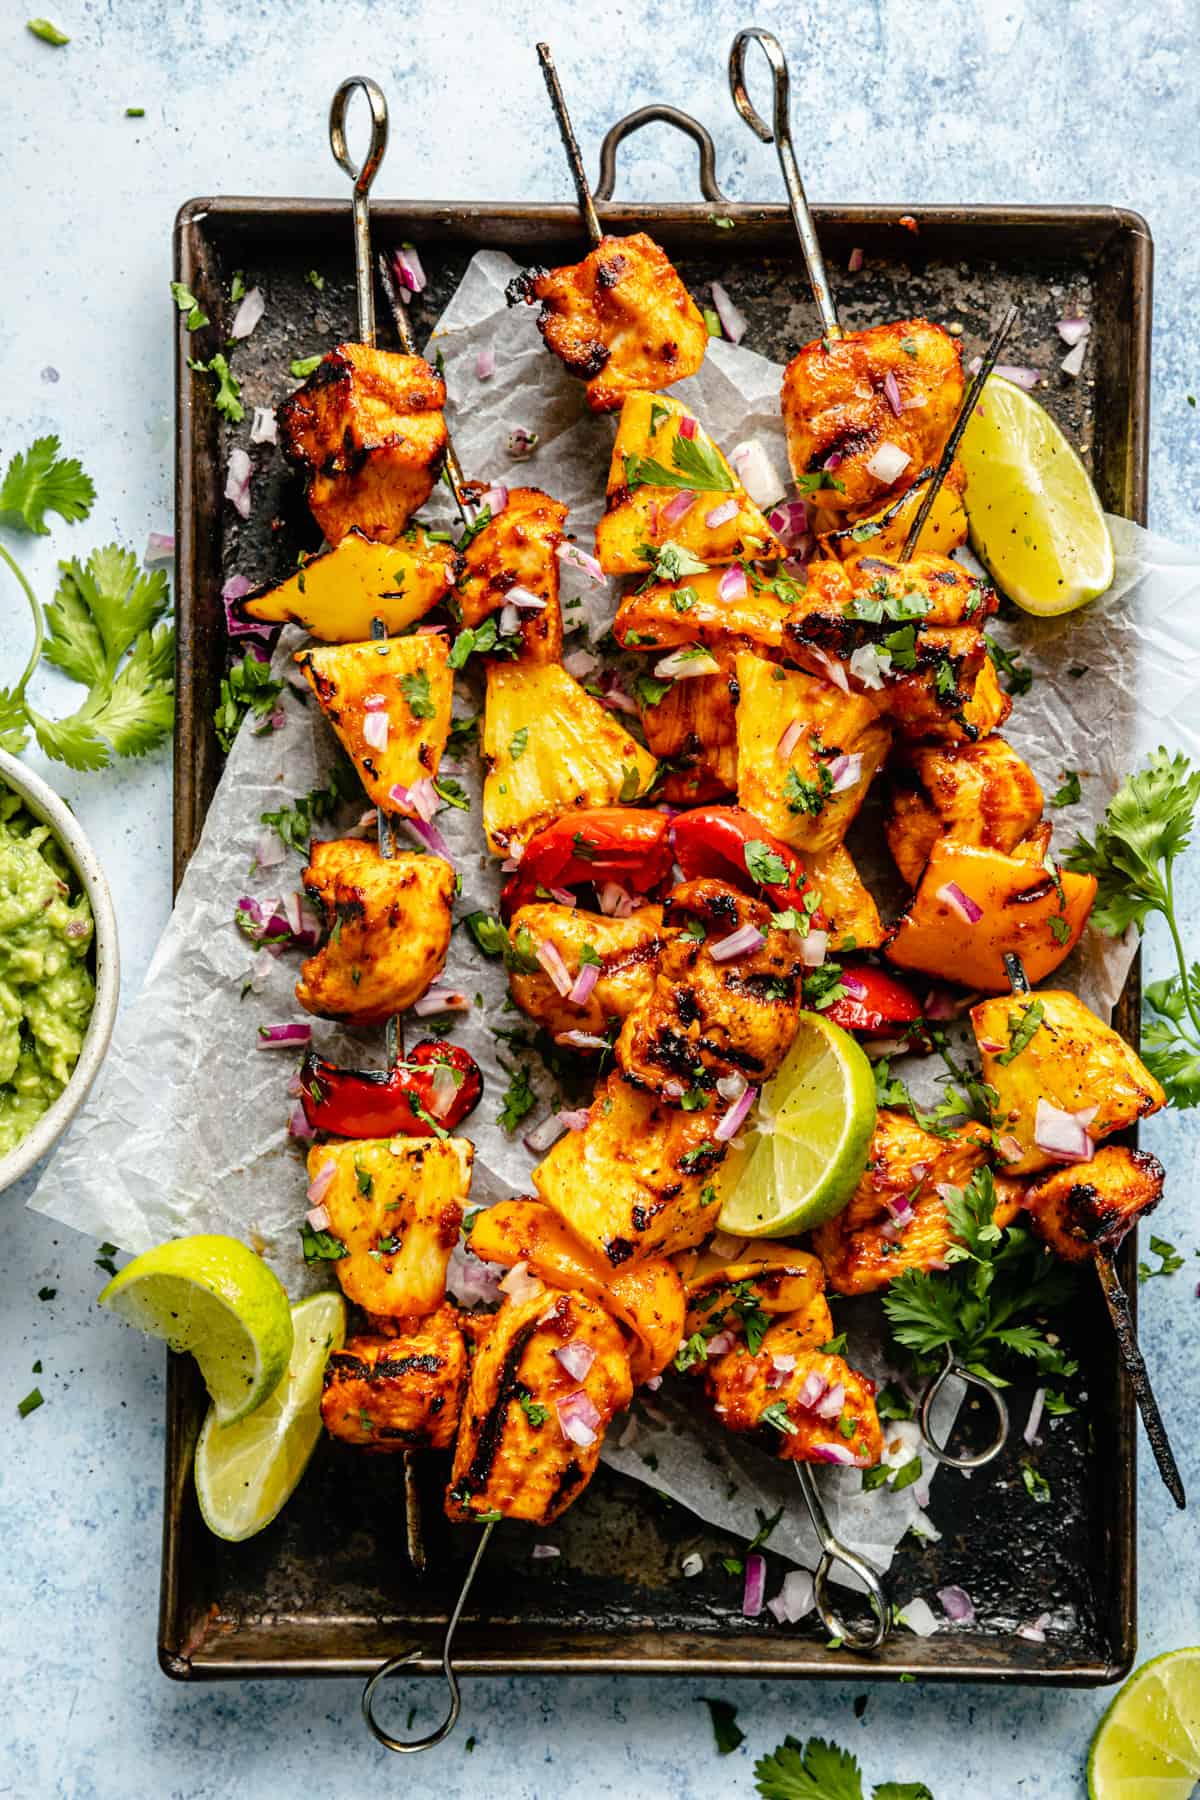 Pineapple chicken kabobs on a baking sheet with guacamole and limes around.